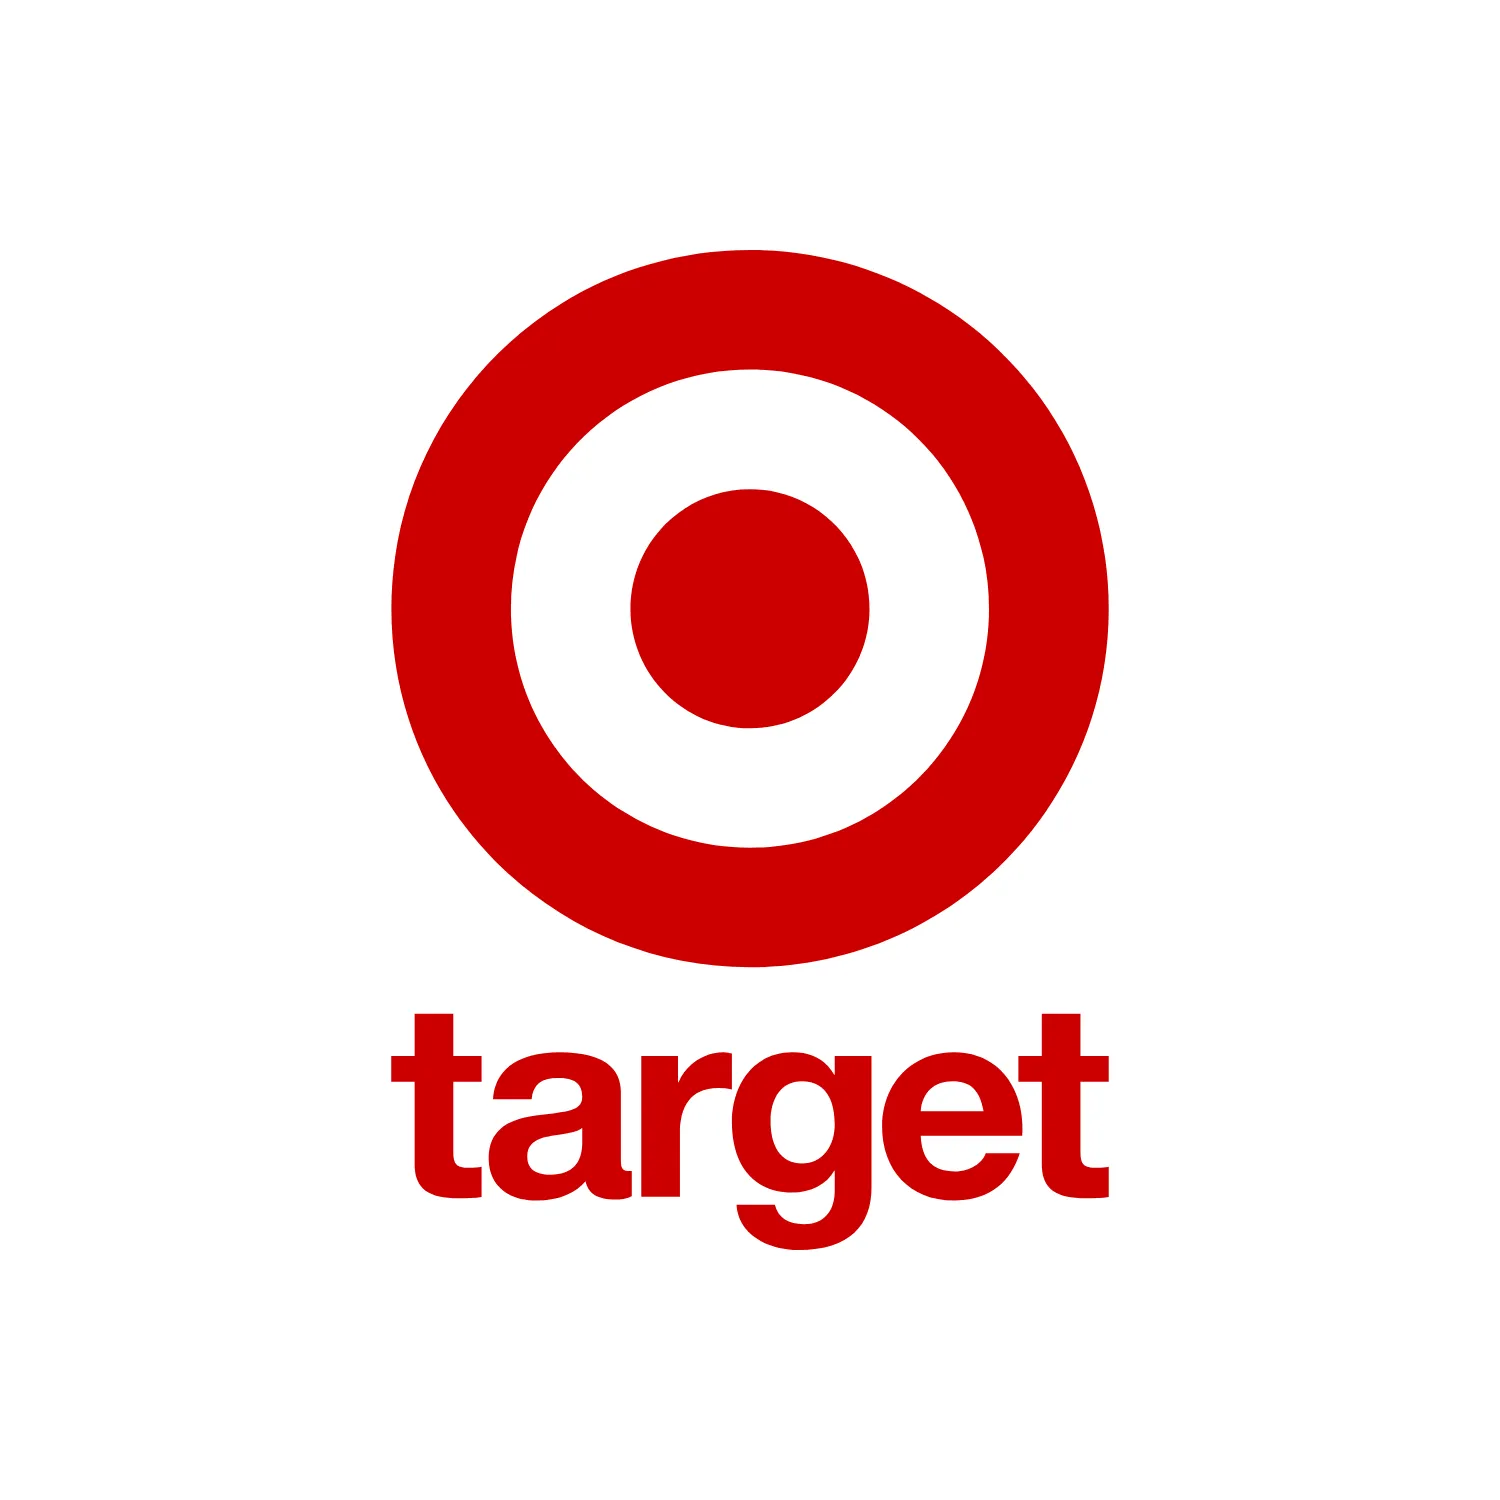 Database of Target Locations in the United States